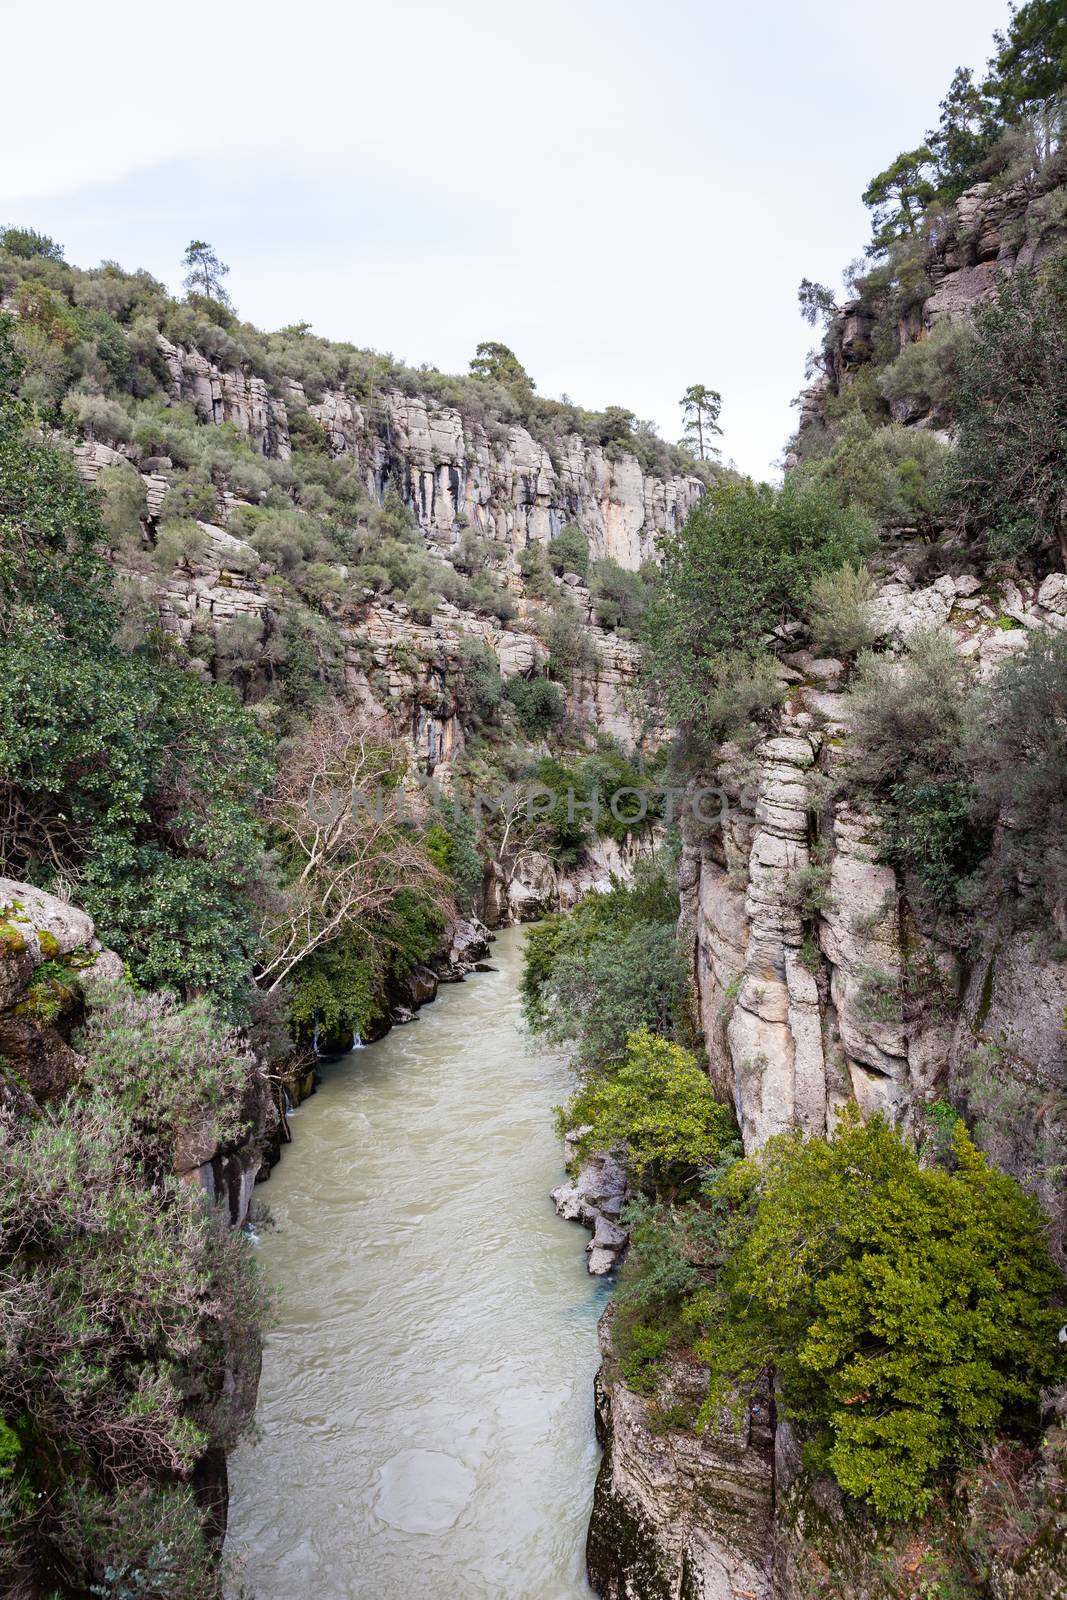 Koprulu Canyon.  A view of Kopru River and Koprulu Canyon is a National Park in the province of Antalya, south western Turkey.